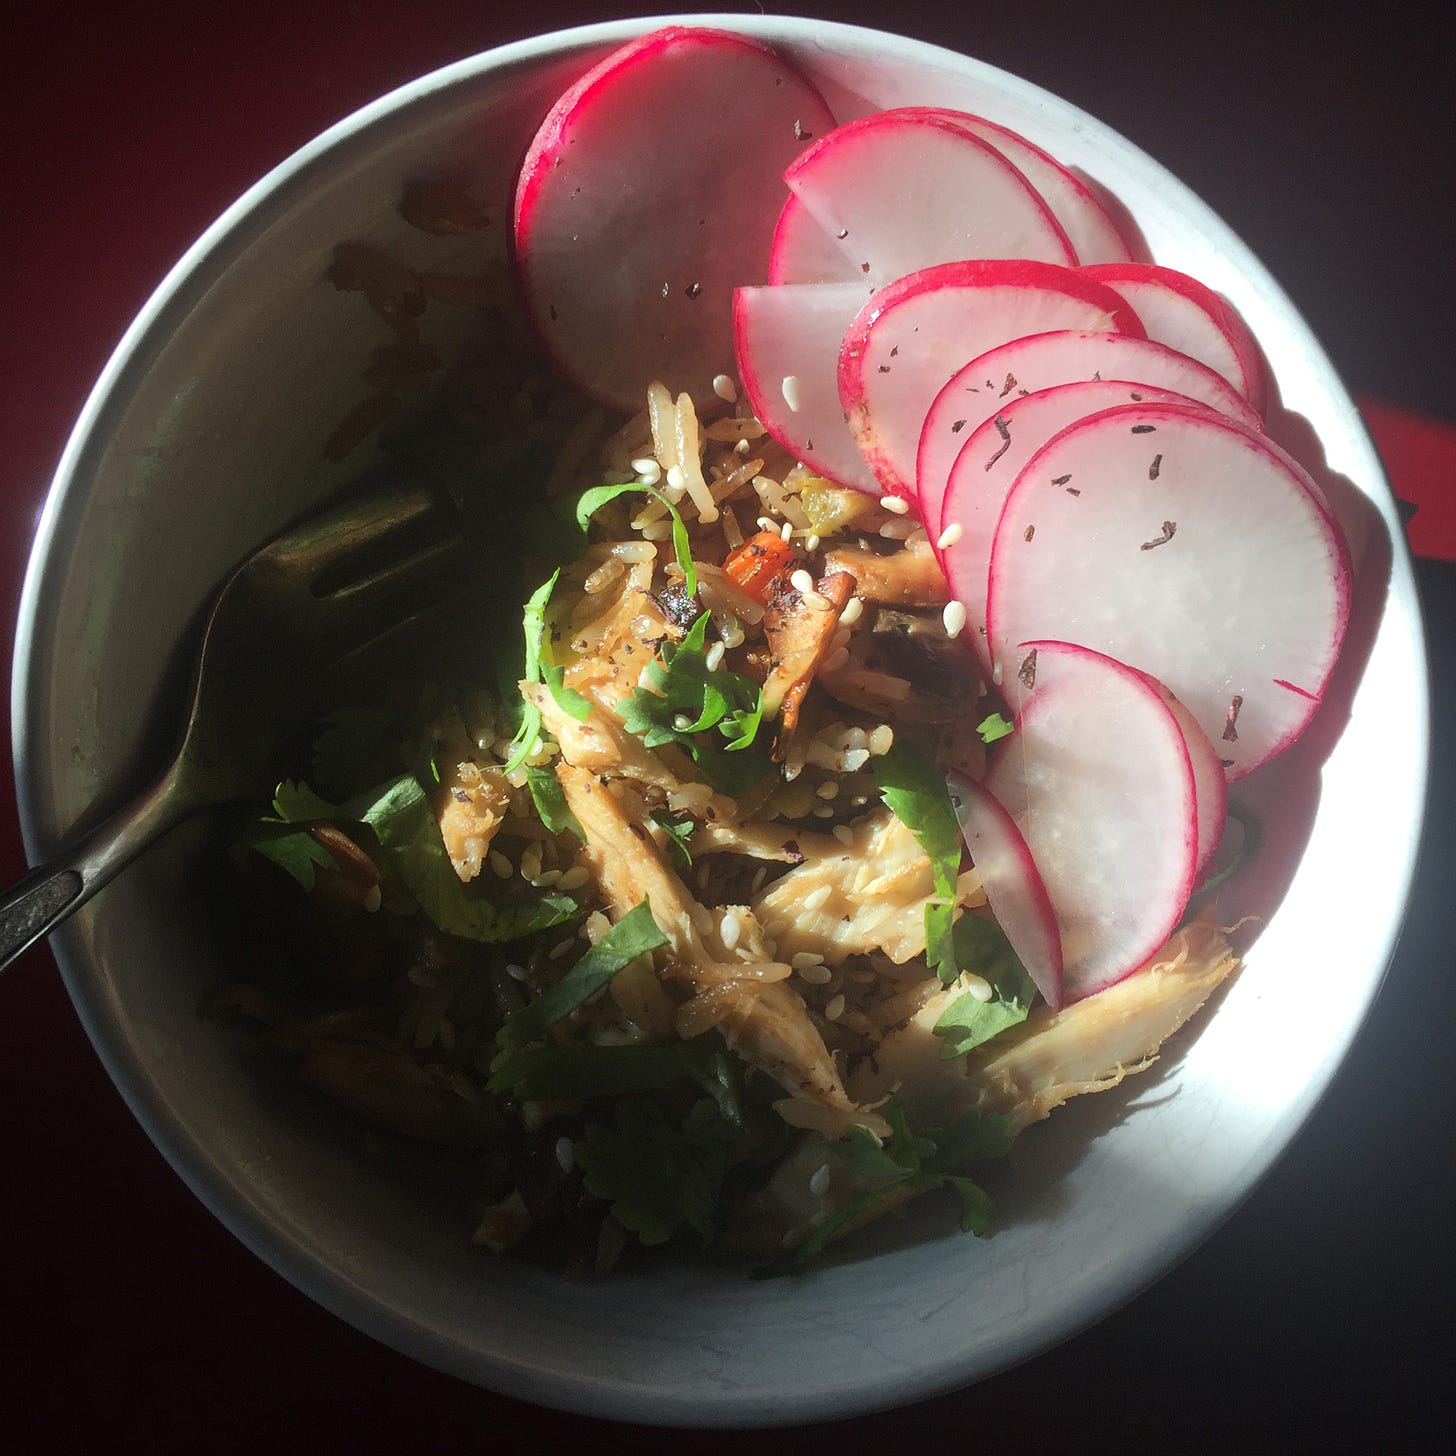 A small white bowl of fried rice in a beam of sunlight. Thinly sliced radishes are arranged around the edge of the bowl, and sesame seeds and pieces of cilantro dust the top.